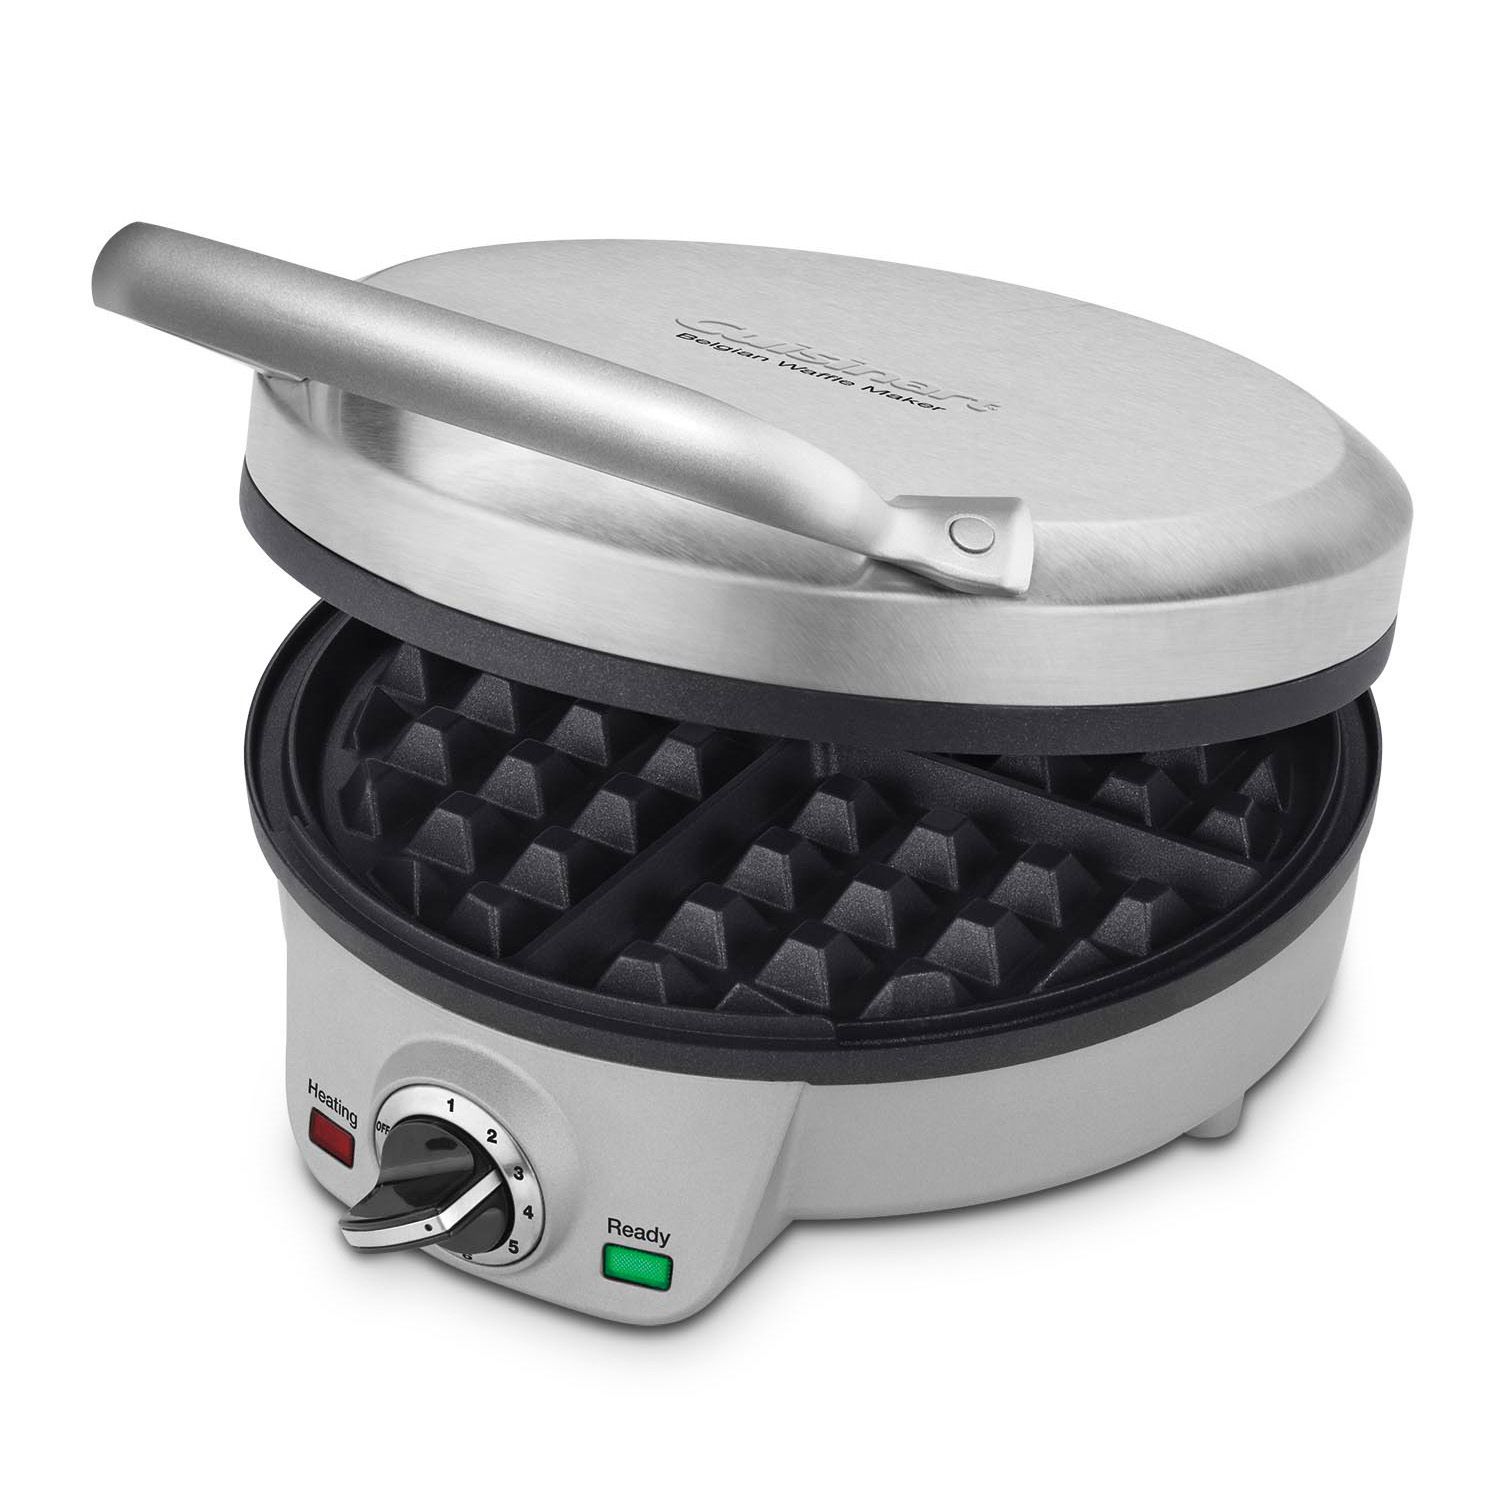 Dash Mini Waffle Makers 4-Pack Just $14.91